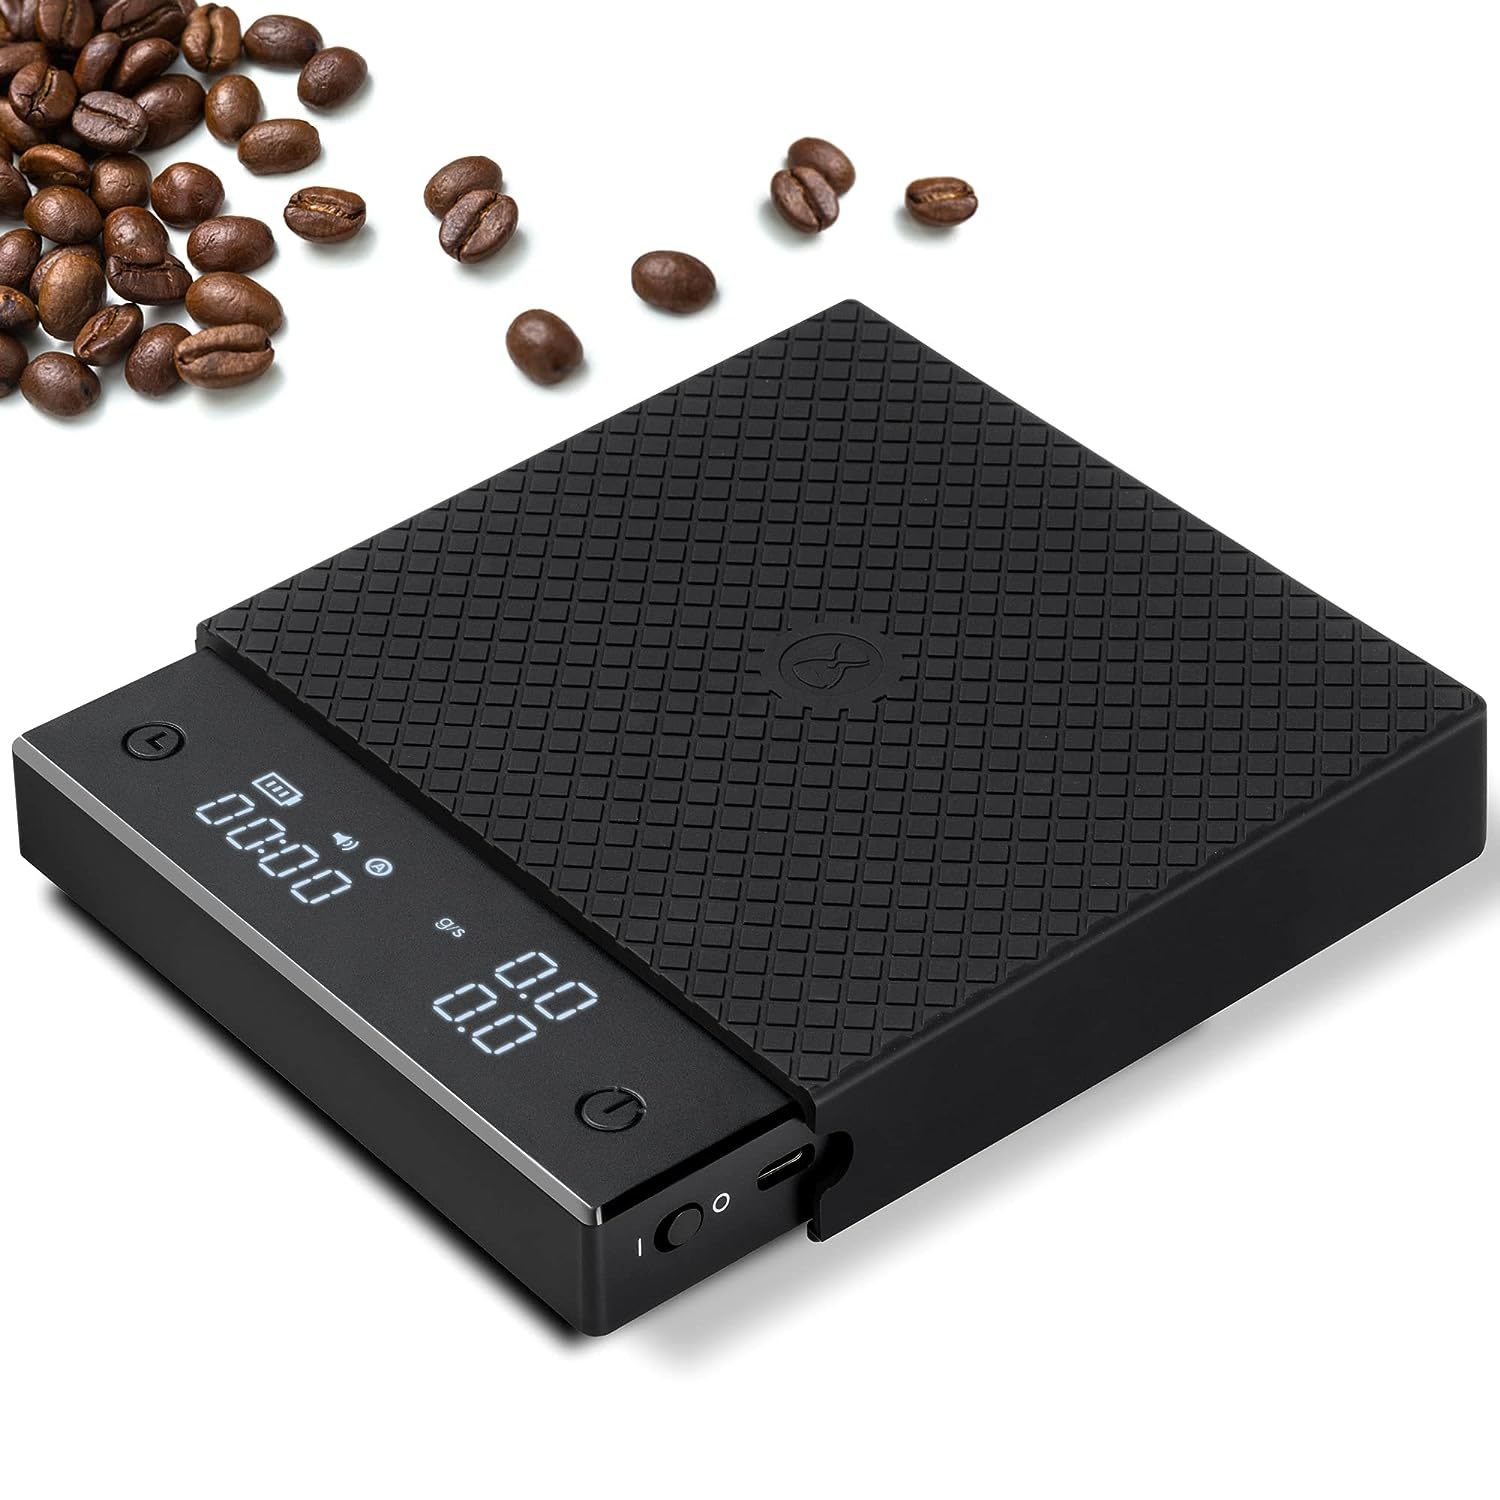 Weightman Espresso/coffee Scale With Timer 1000G X 0.1G Small & Thin Travel  Coffee Scale 